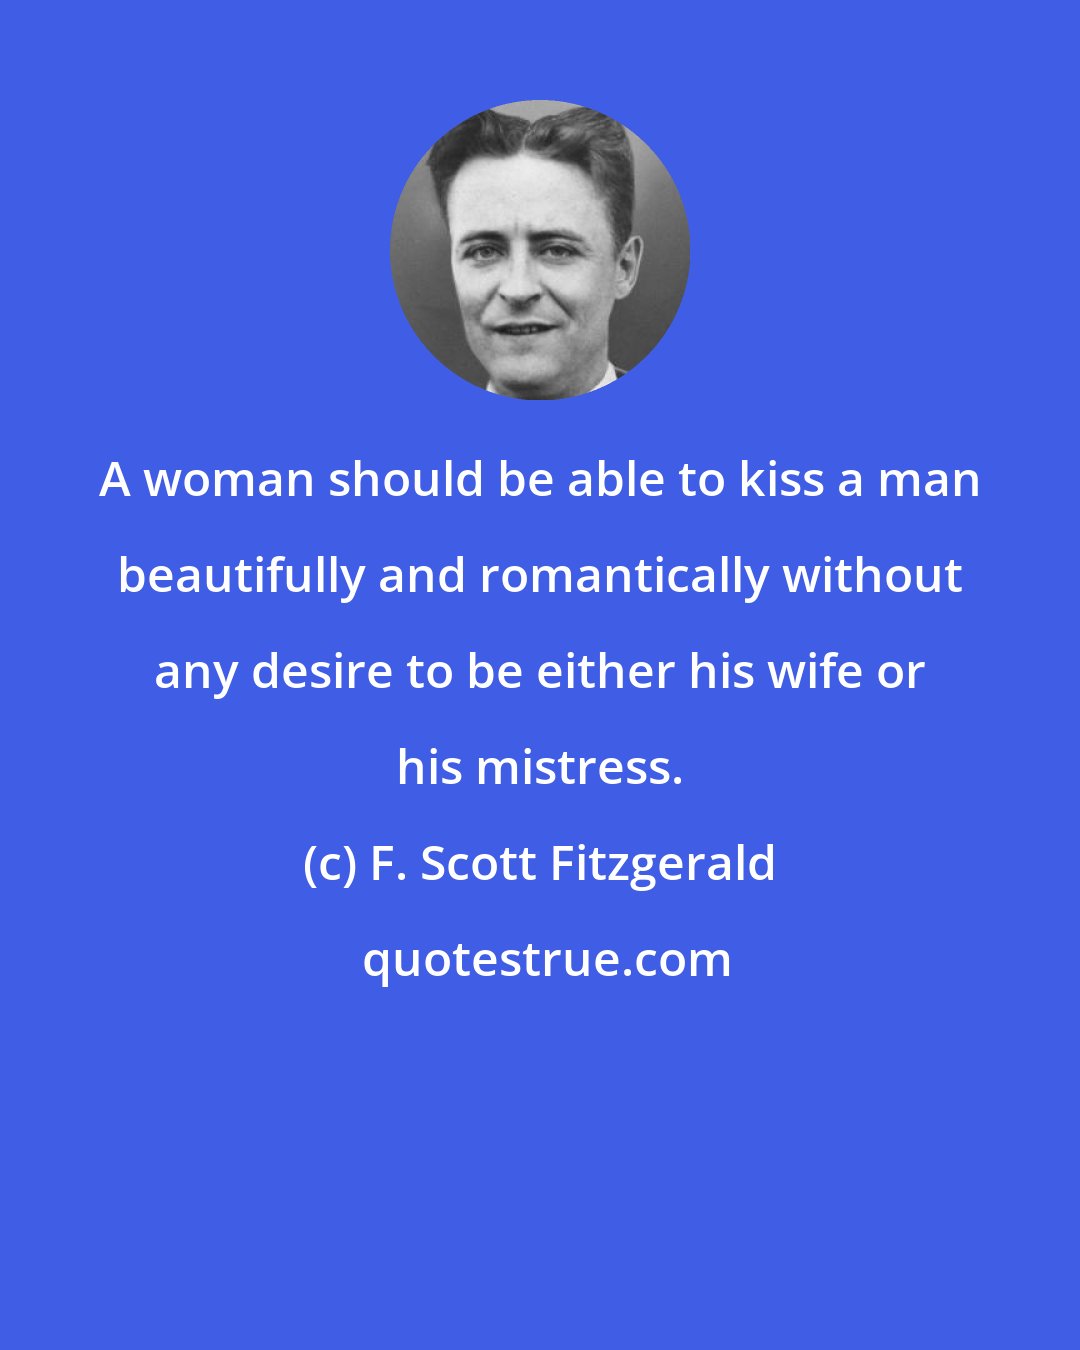 F. Scott Fitzgerald: A woman should be able to kiss a man beautifully and romantically without any desire to be either his wife or his mistress.